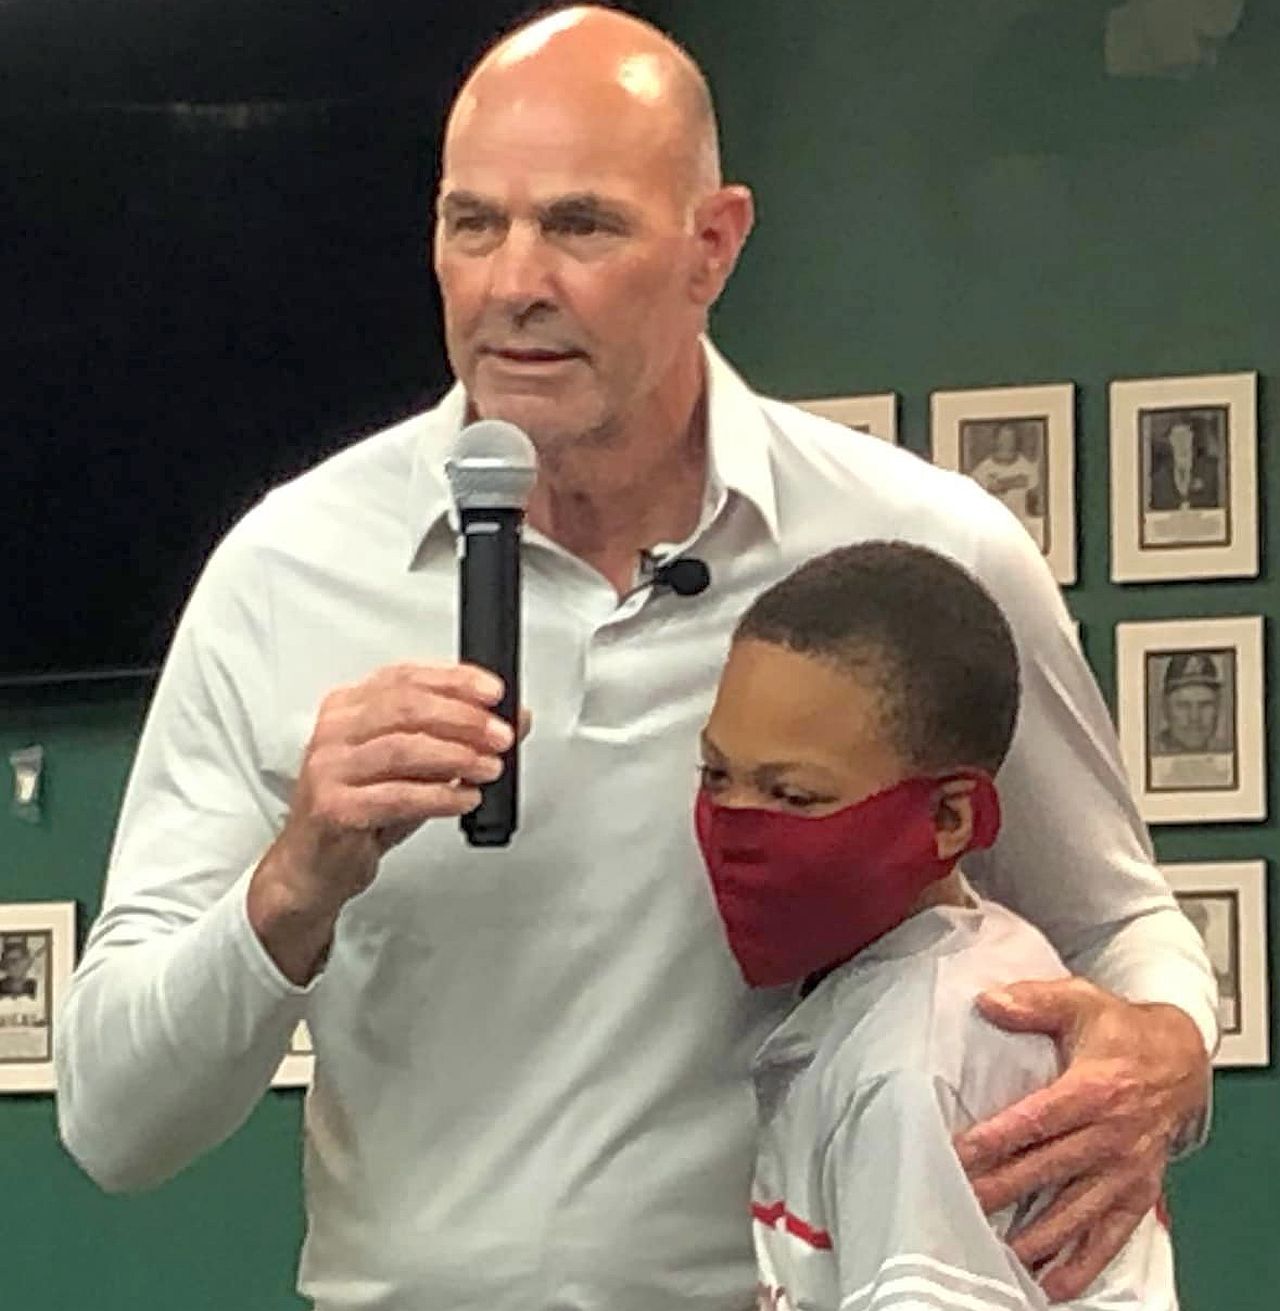 Kirk Gibson building a new legacy in fight against Parkinson's